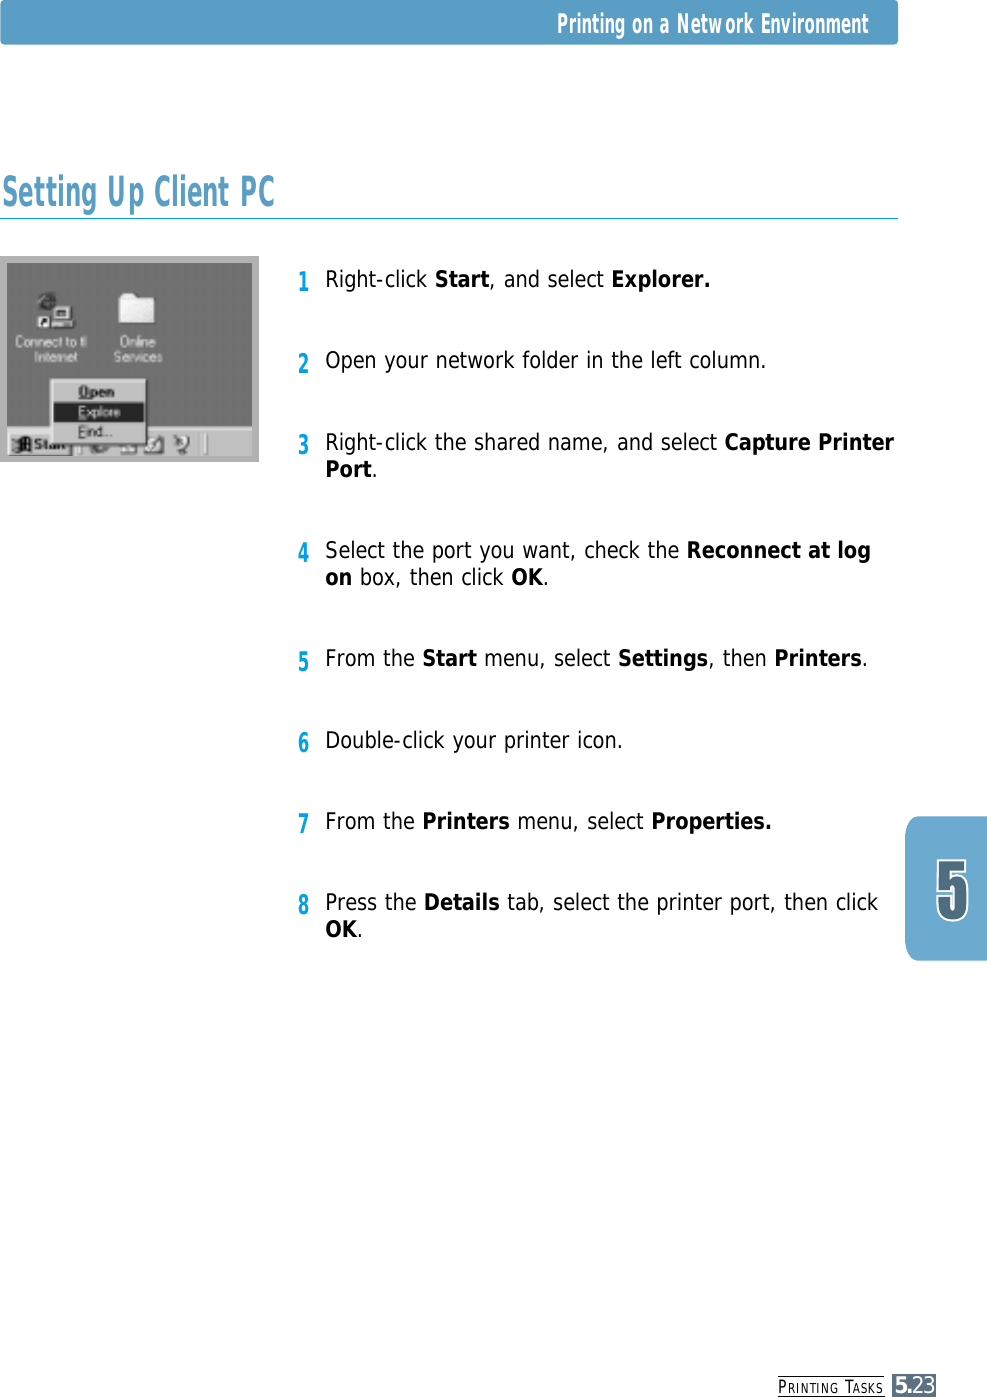 PRINTING TASKS5.231Right-click Start, and select Explorer.2Open your network folder in the left column.3Right-click the shared name, and select Capture PrinterPort.4Select the port you want, check the Reconnect at logon box, then click OK.5From the Start menu, select Settings, then Printers.6Double-click your printer icon.7From the Printers menu, select Properties.8Press the Details tab, select the printer port, then clickOK.Setting Up Client PCPrinting on a Network Environment